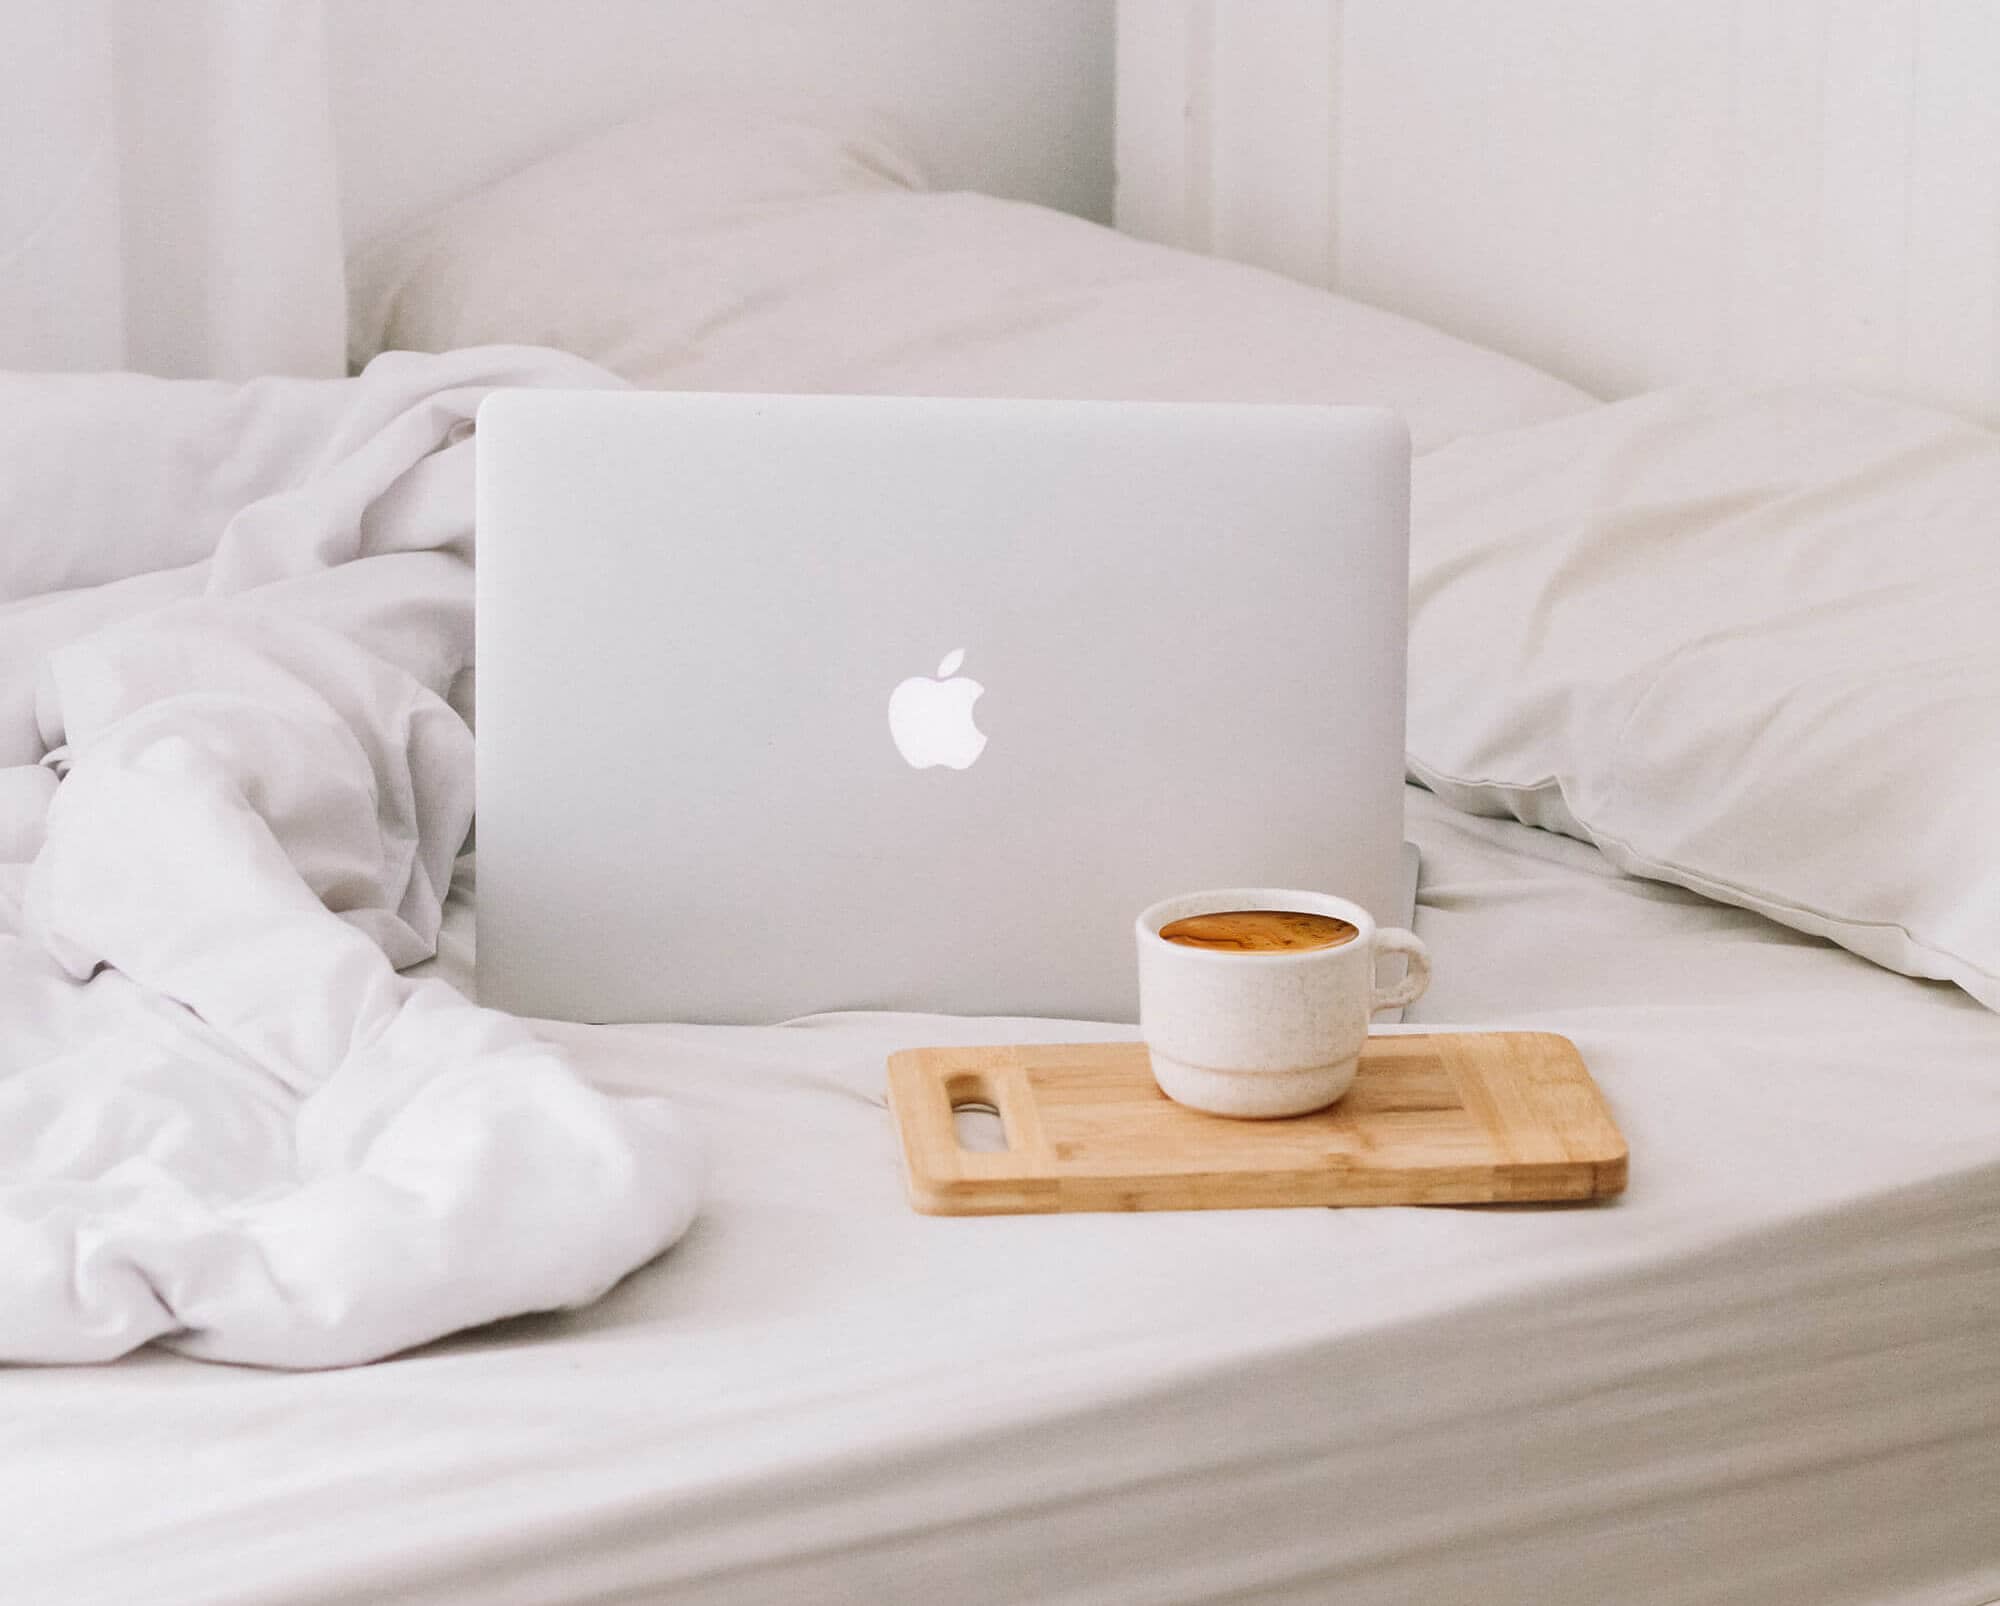 Laptop on a bed with a cup of coffee in front